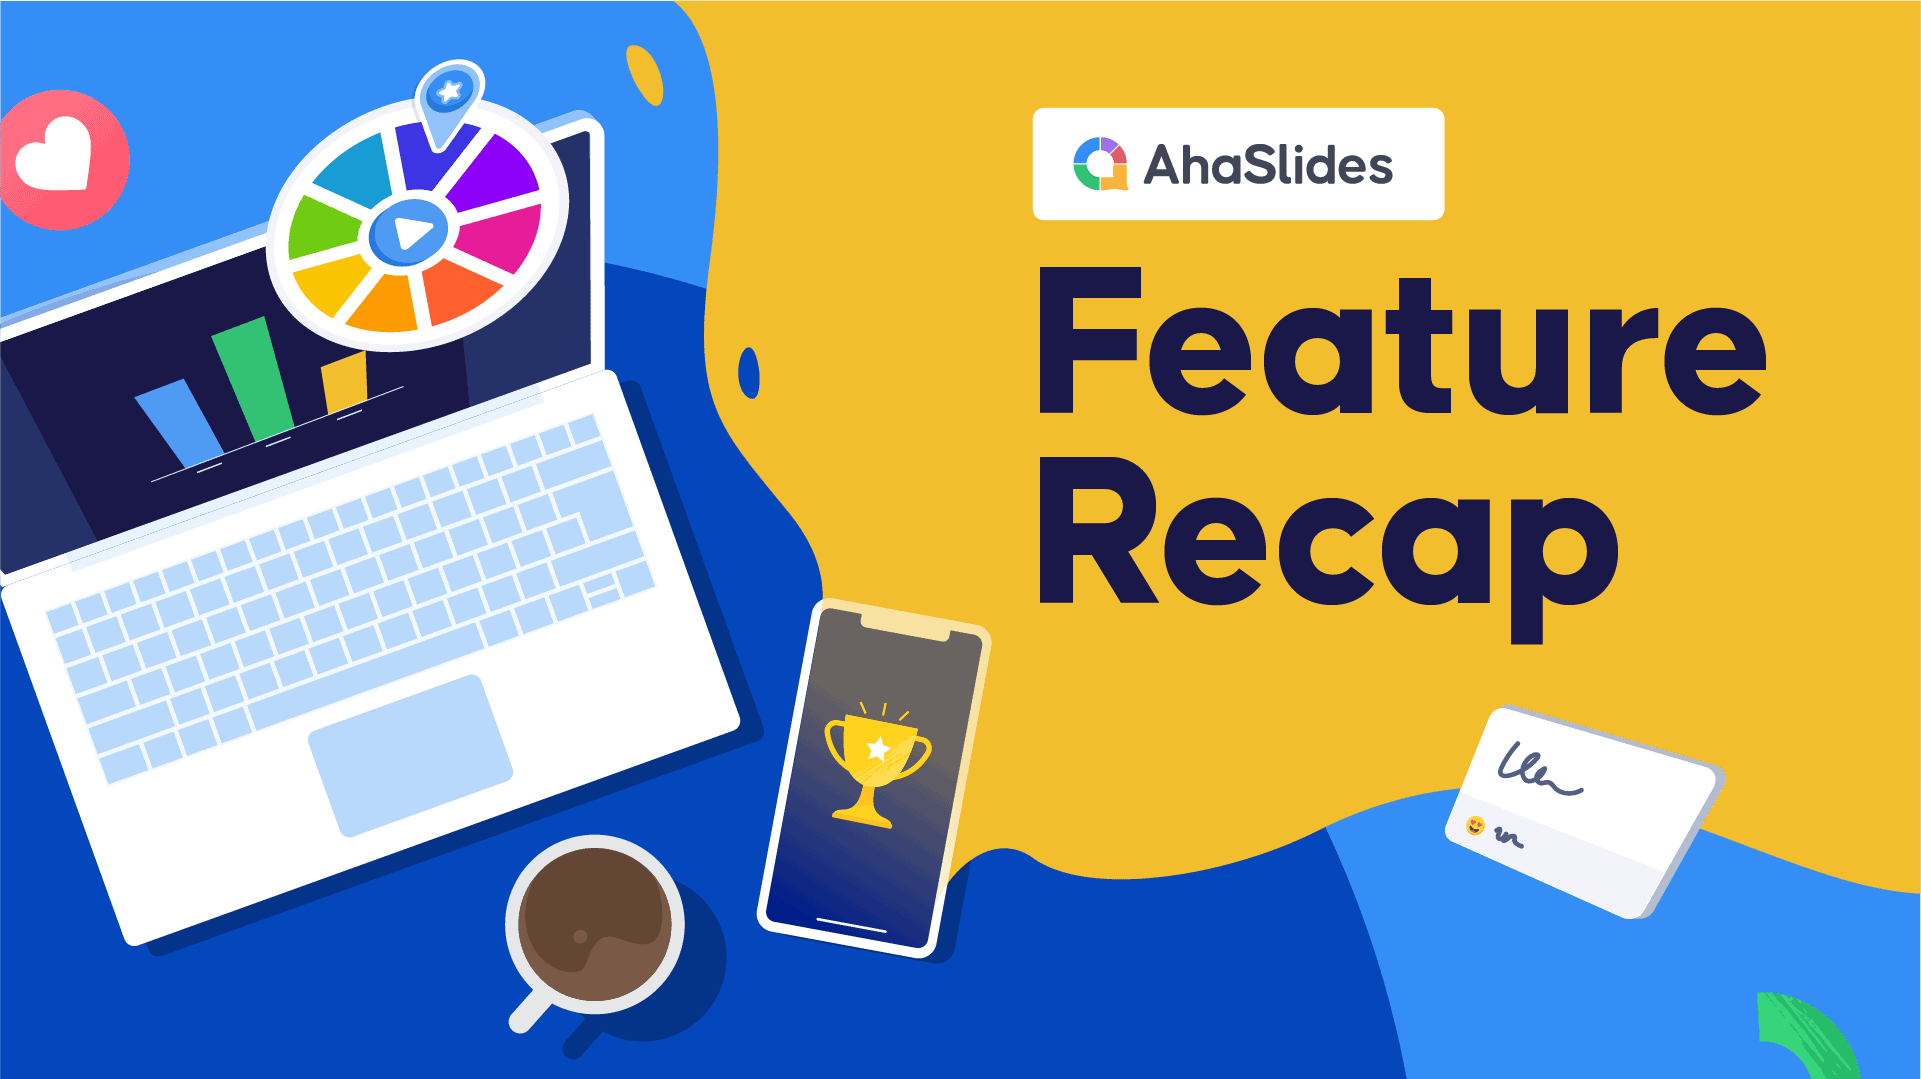 AhaSlides in 2021 - Recap our Newest Features!